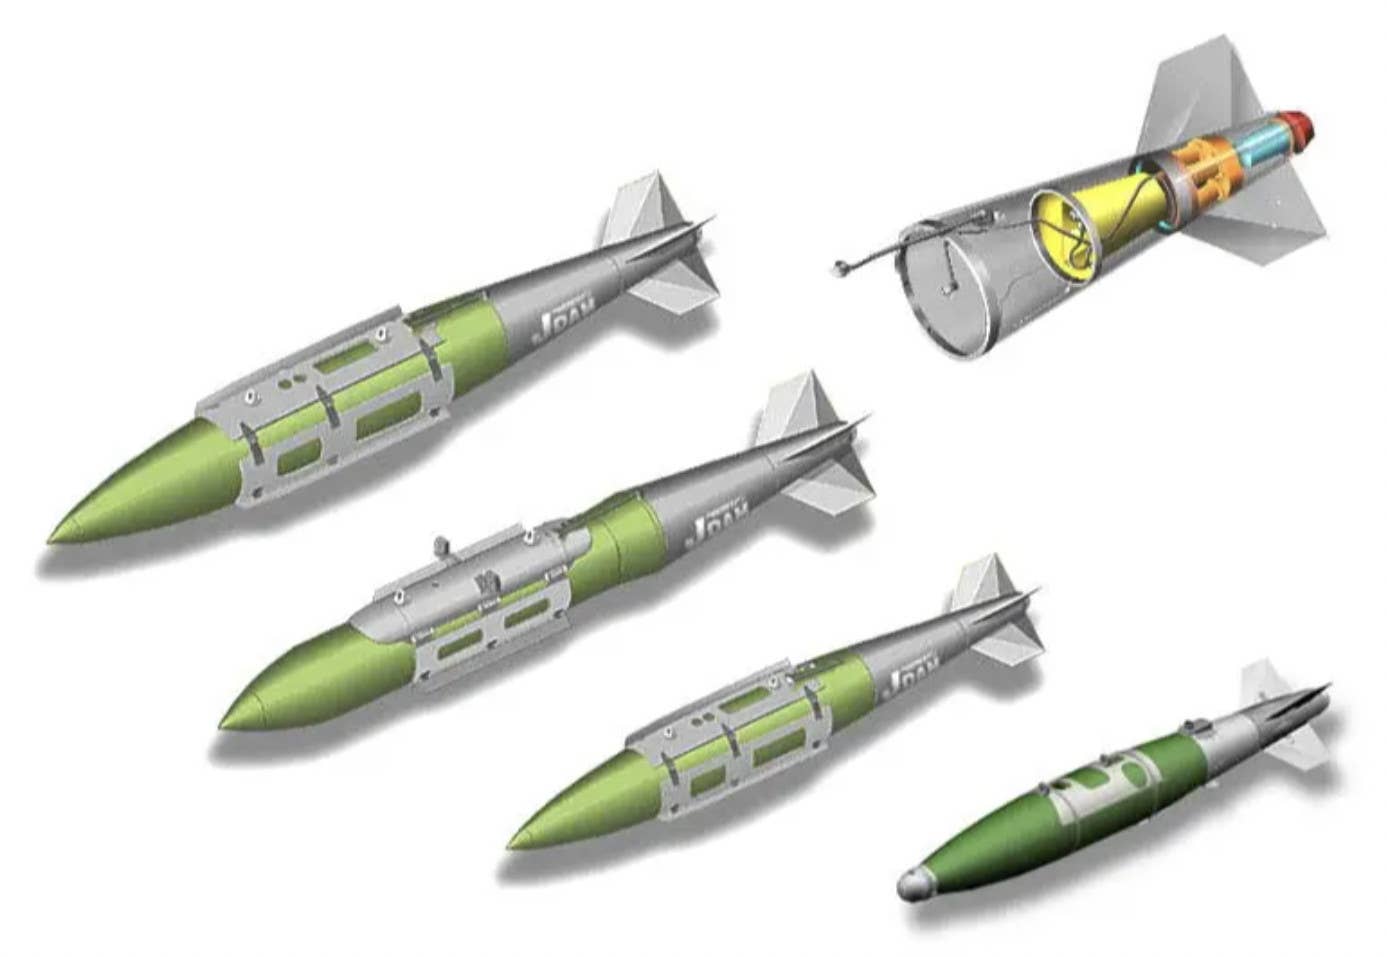 A graphic showing the various tiers of standard JDAM bombs (from left to right, two 2,000-pound-class variants, a 1,000-pound example, and a 500-pound class type), as well as a close-up of one of the tail guidance sections at top right. <em>USAF</em>